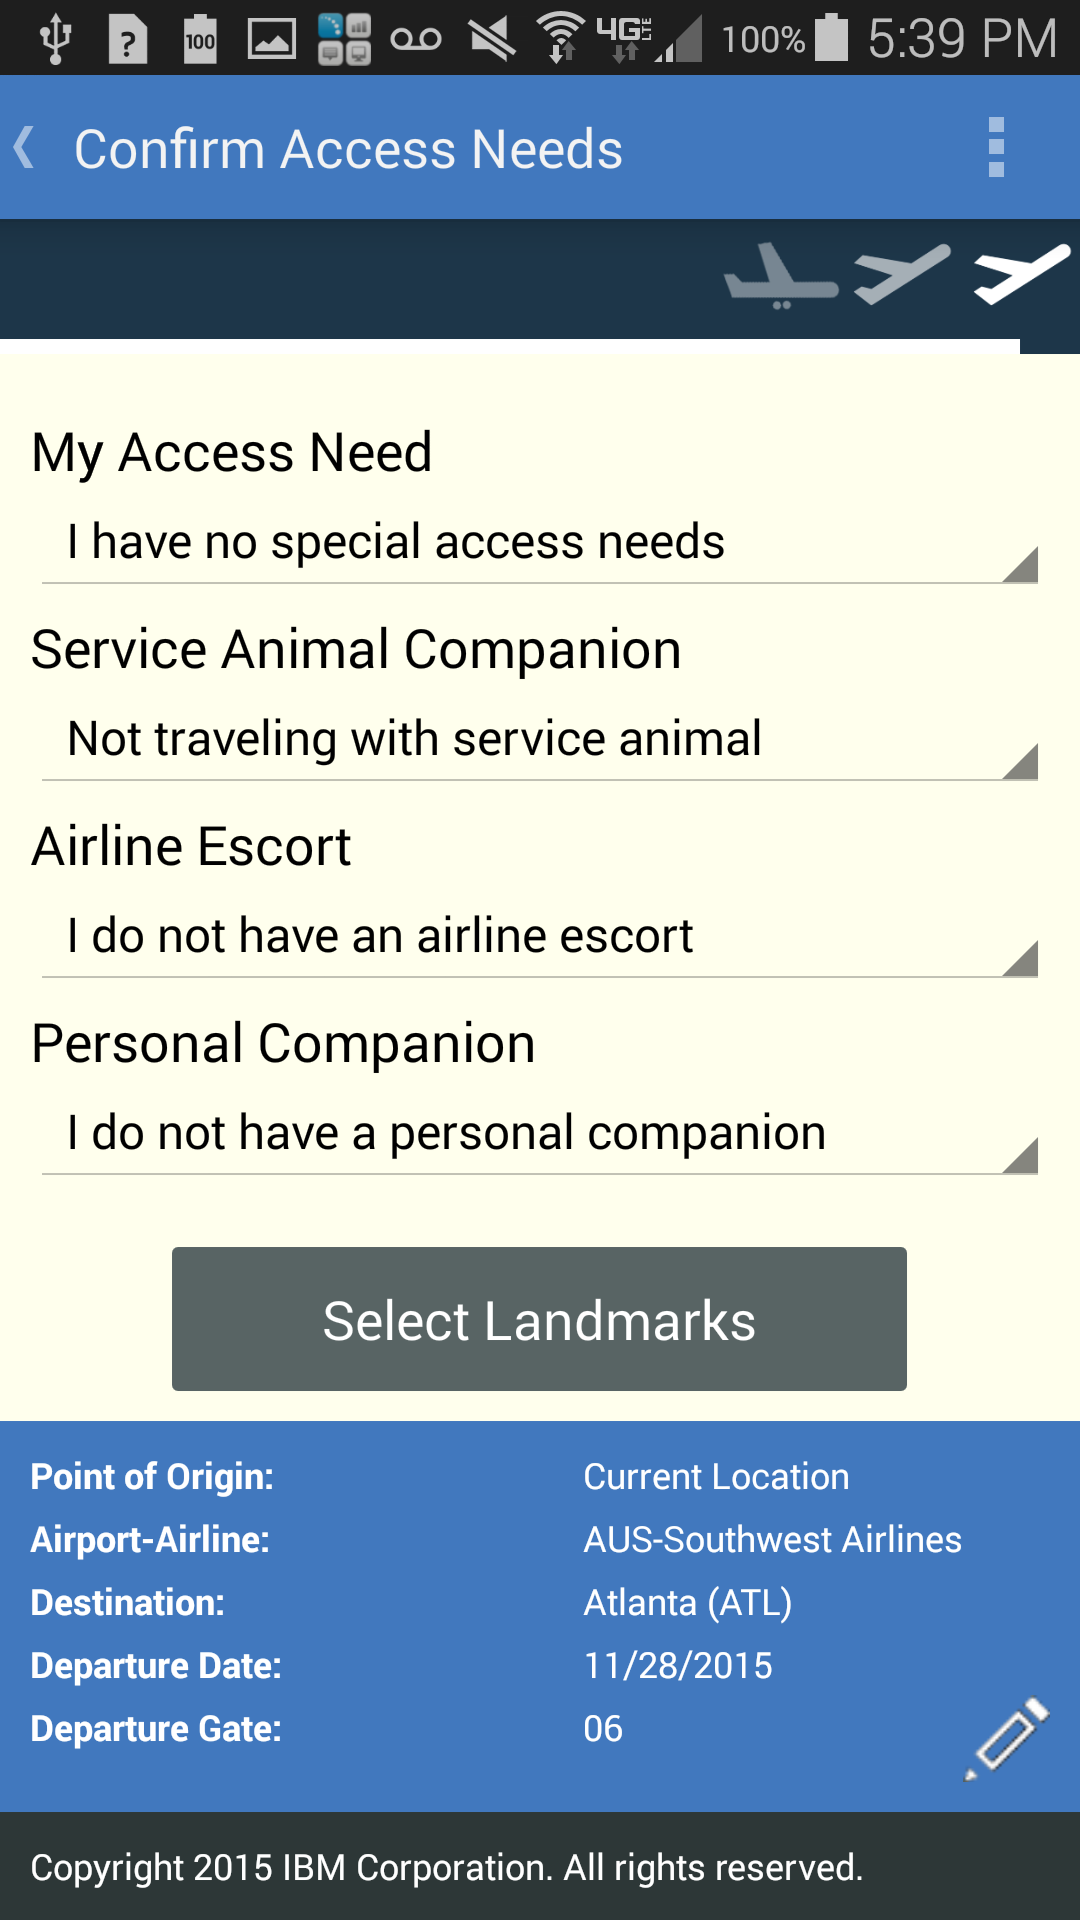 Screenshot of access needs screen from IBM Accessible Airport App